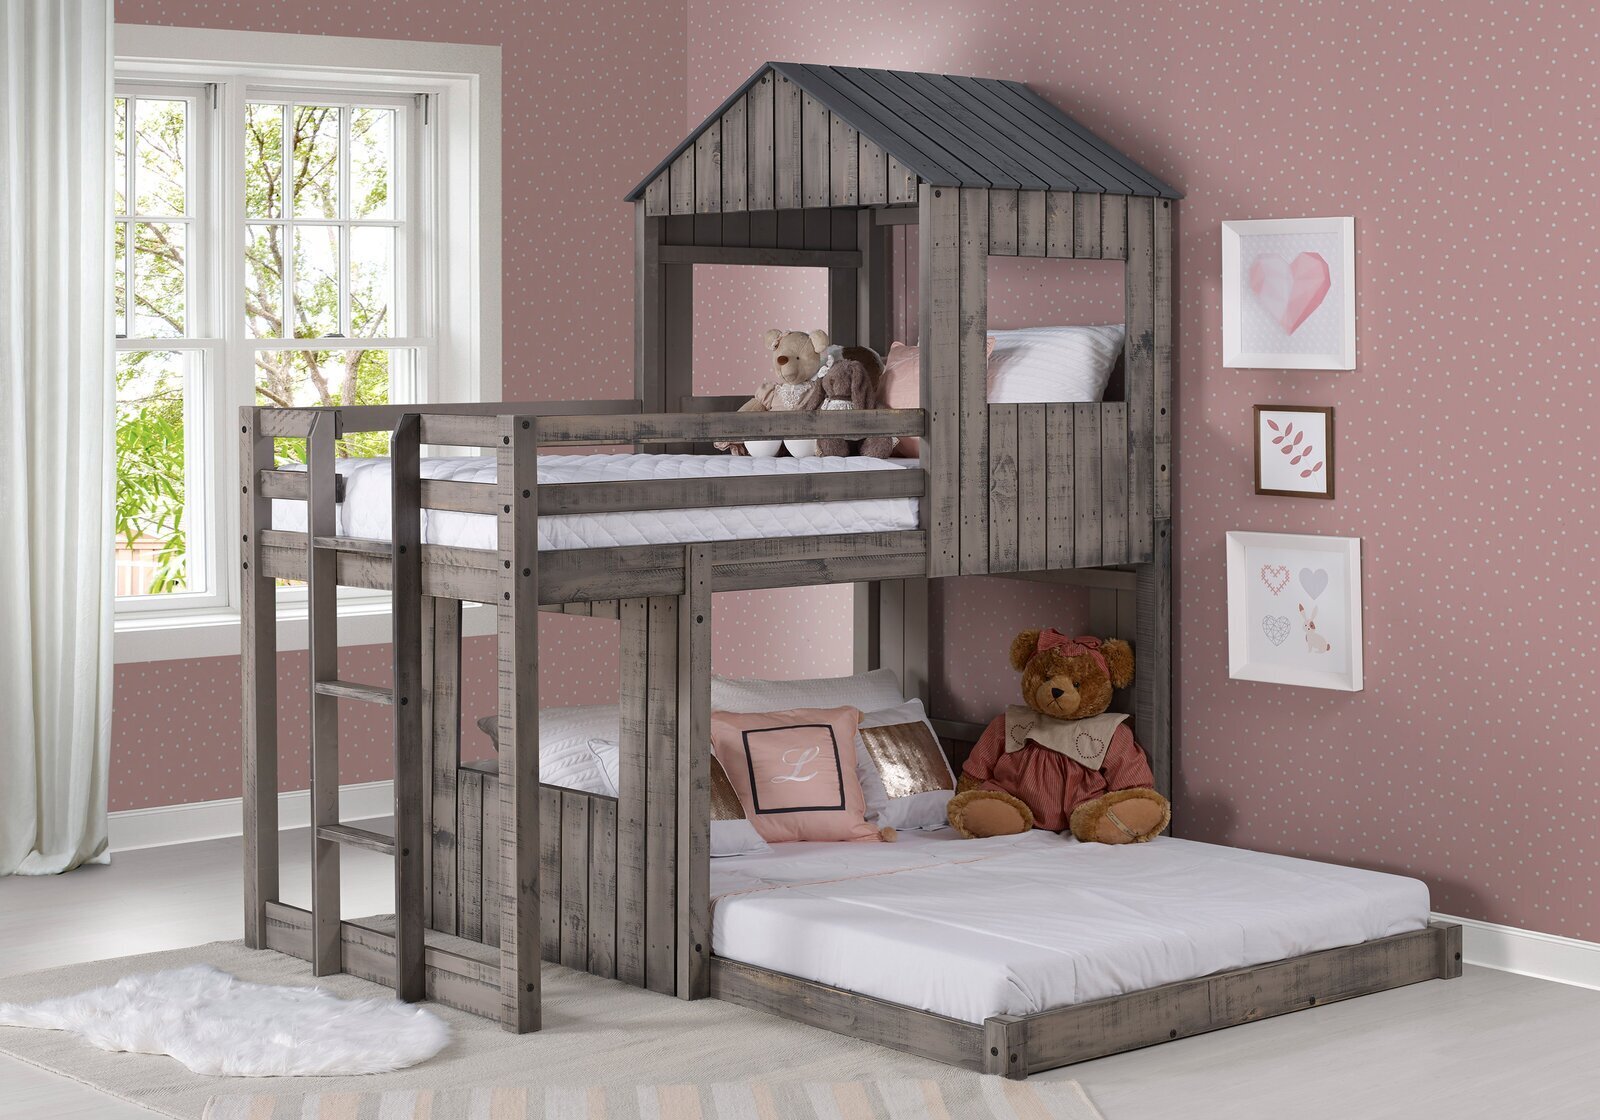 Rustic Outdoorsy T Shaped Bunks